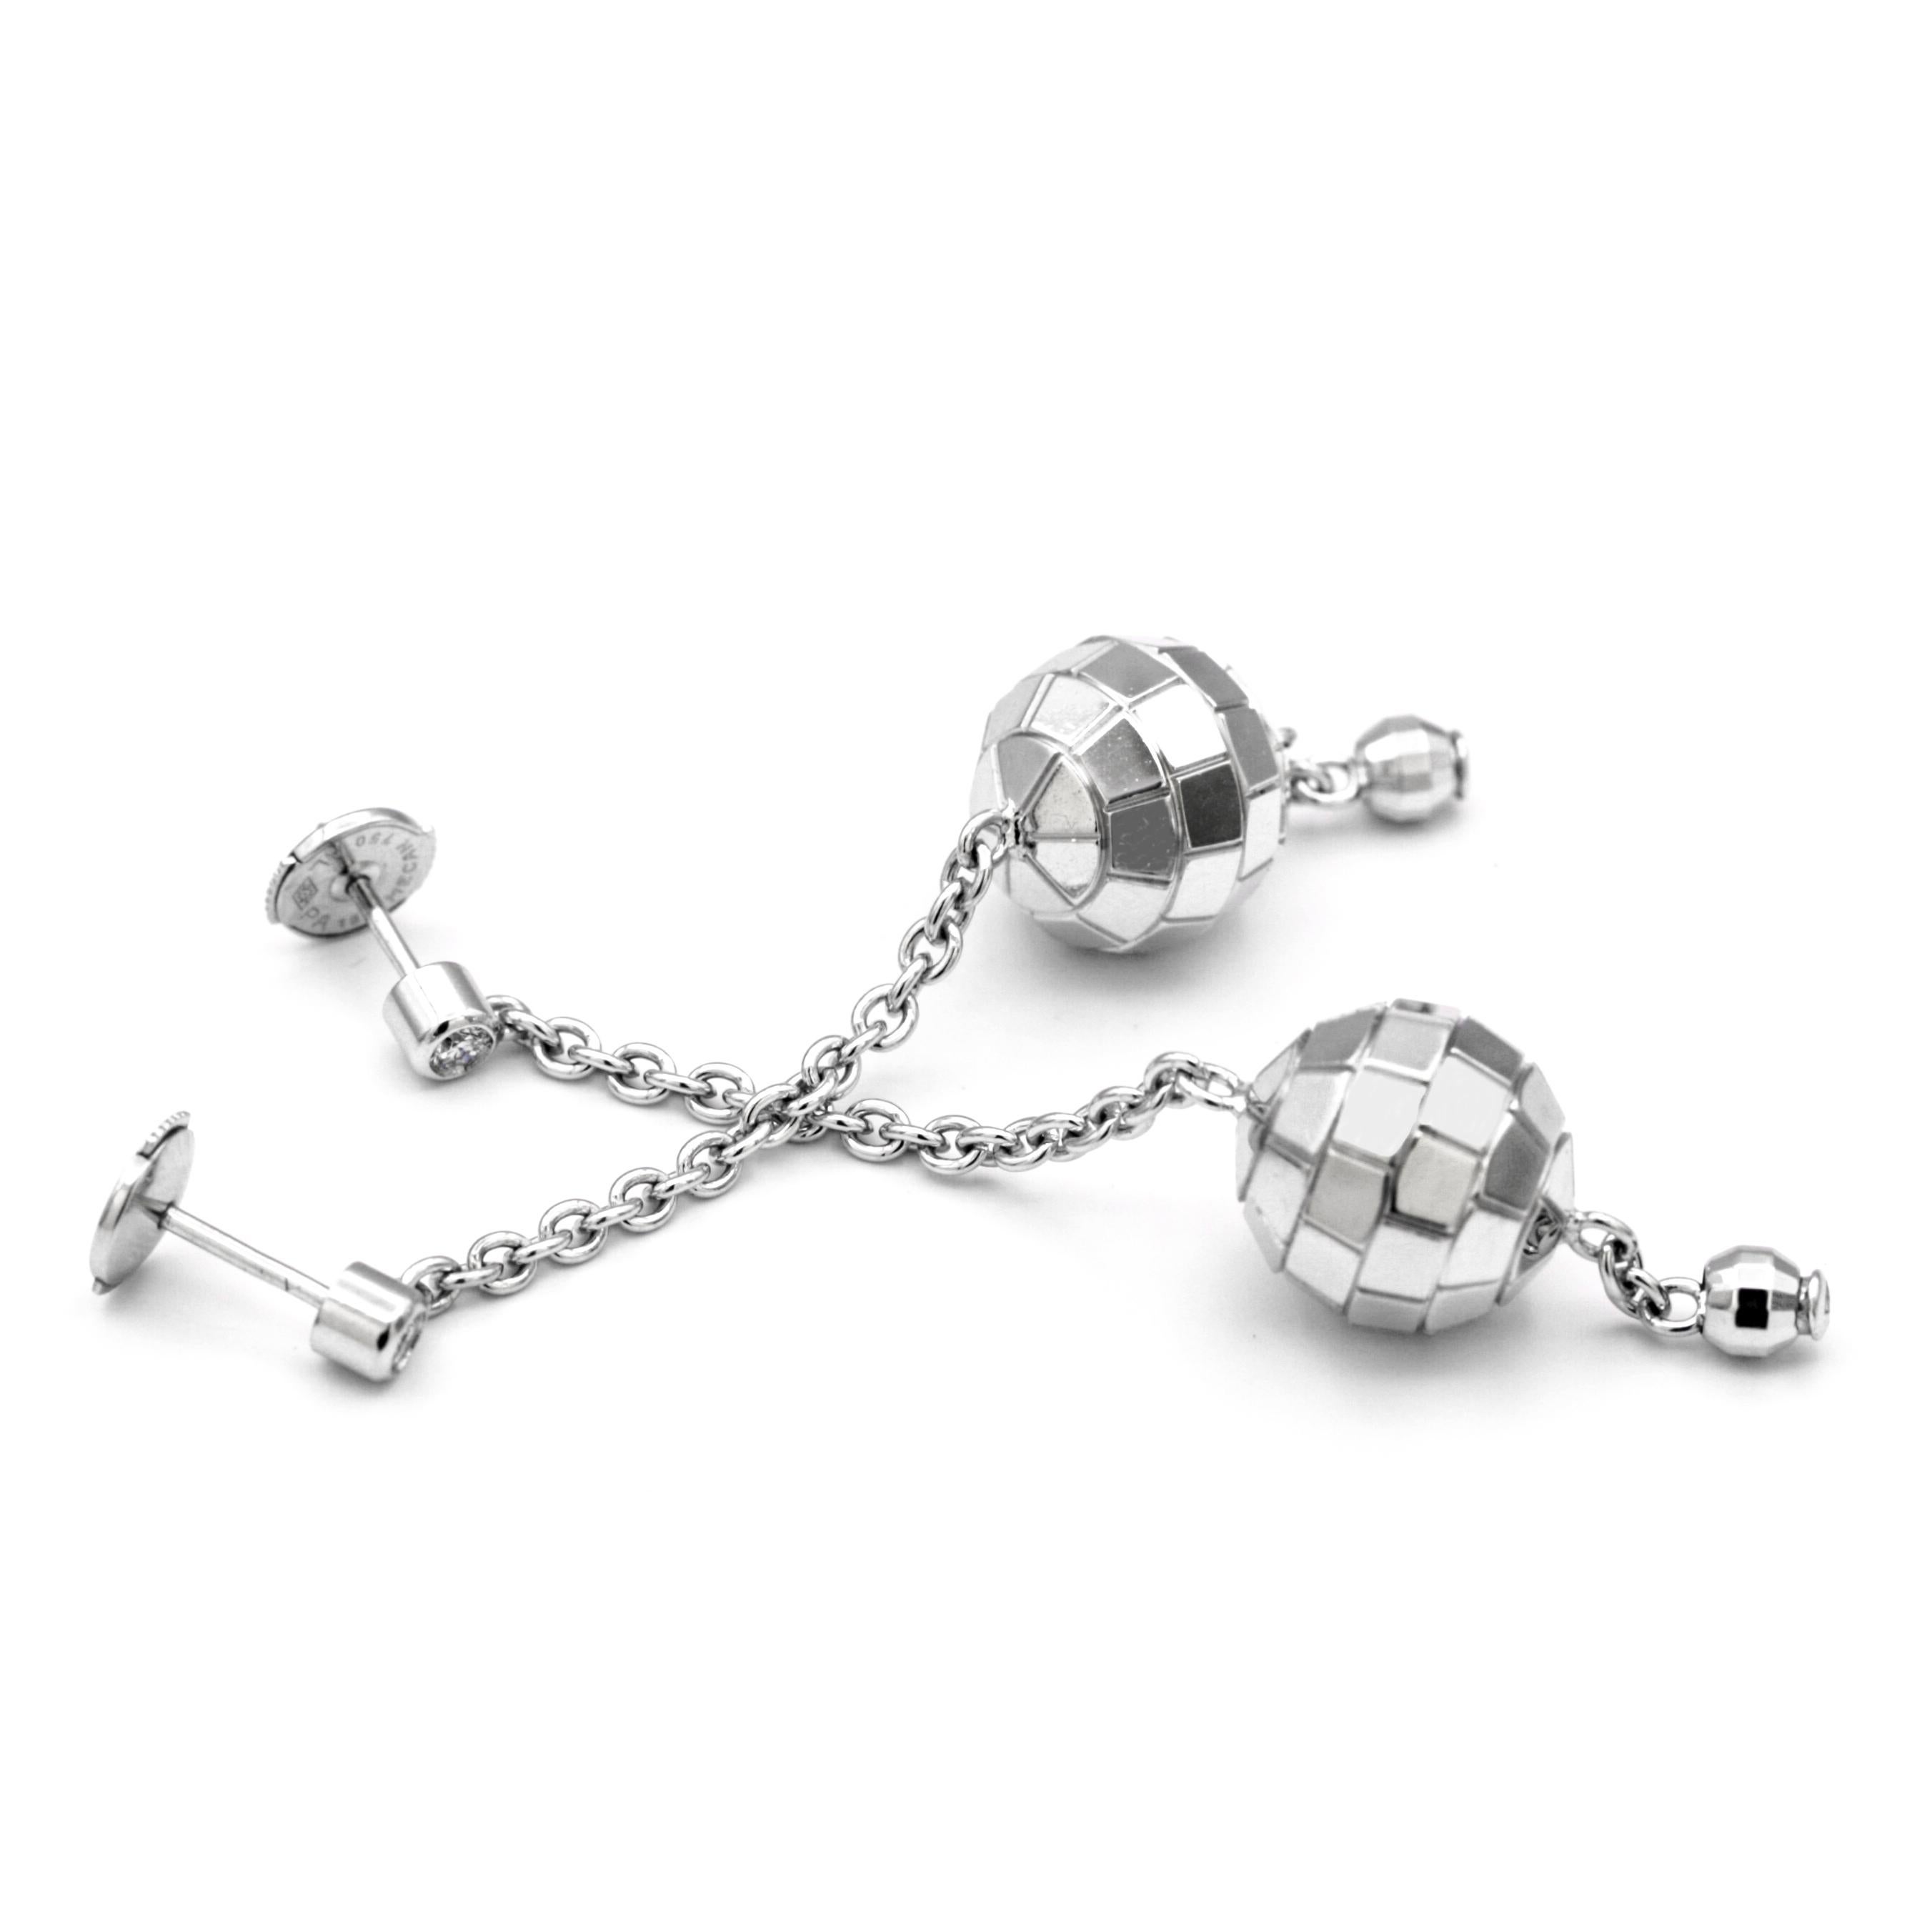 This set of Piaget dangling 18K white gold earrings with bezel set diamond at top of each; the disco ball motif and clutch back closures.
It is sure to start a party anywhere you take them!
This piece will arrive in an elegant Piaget jewelry